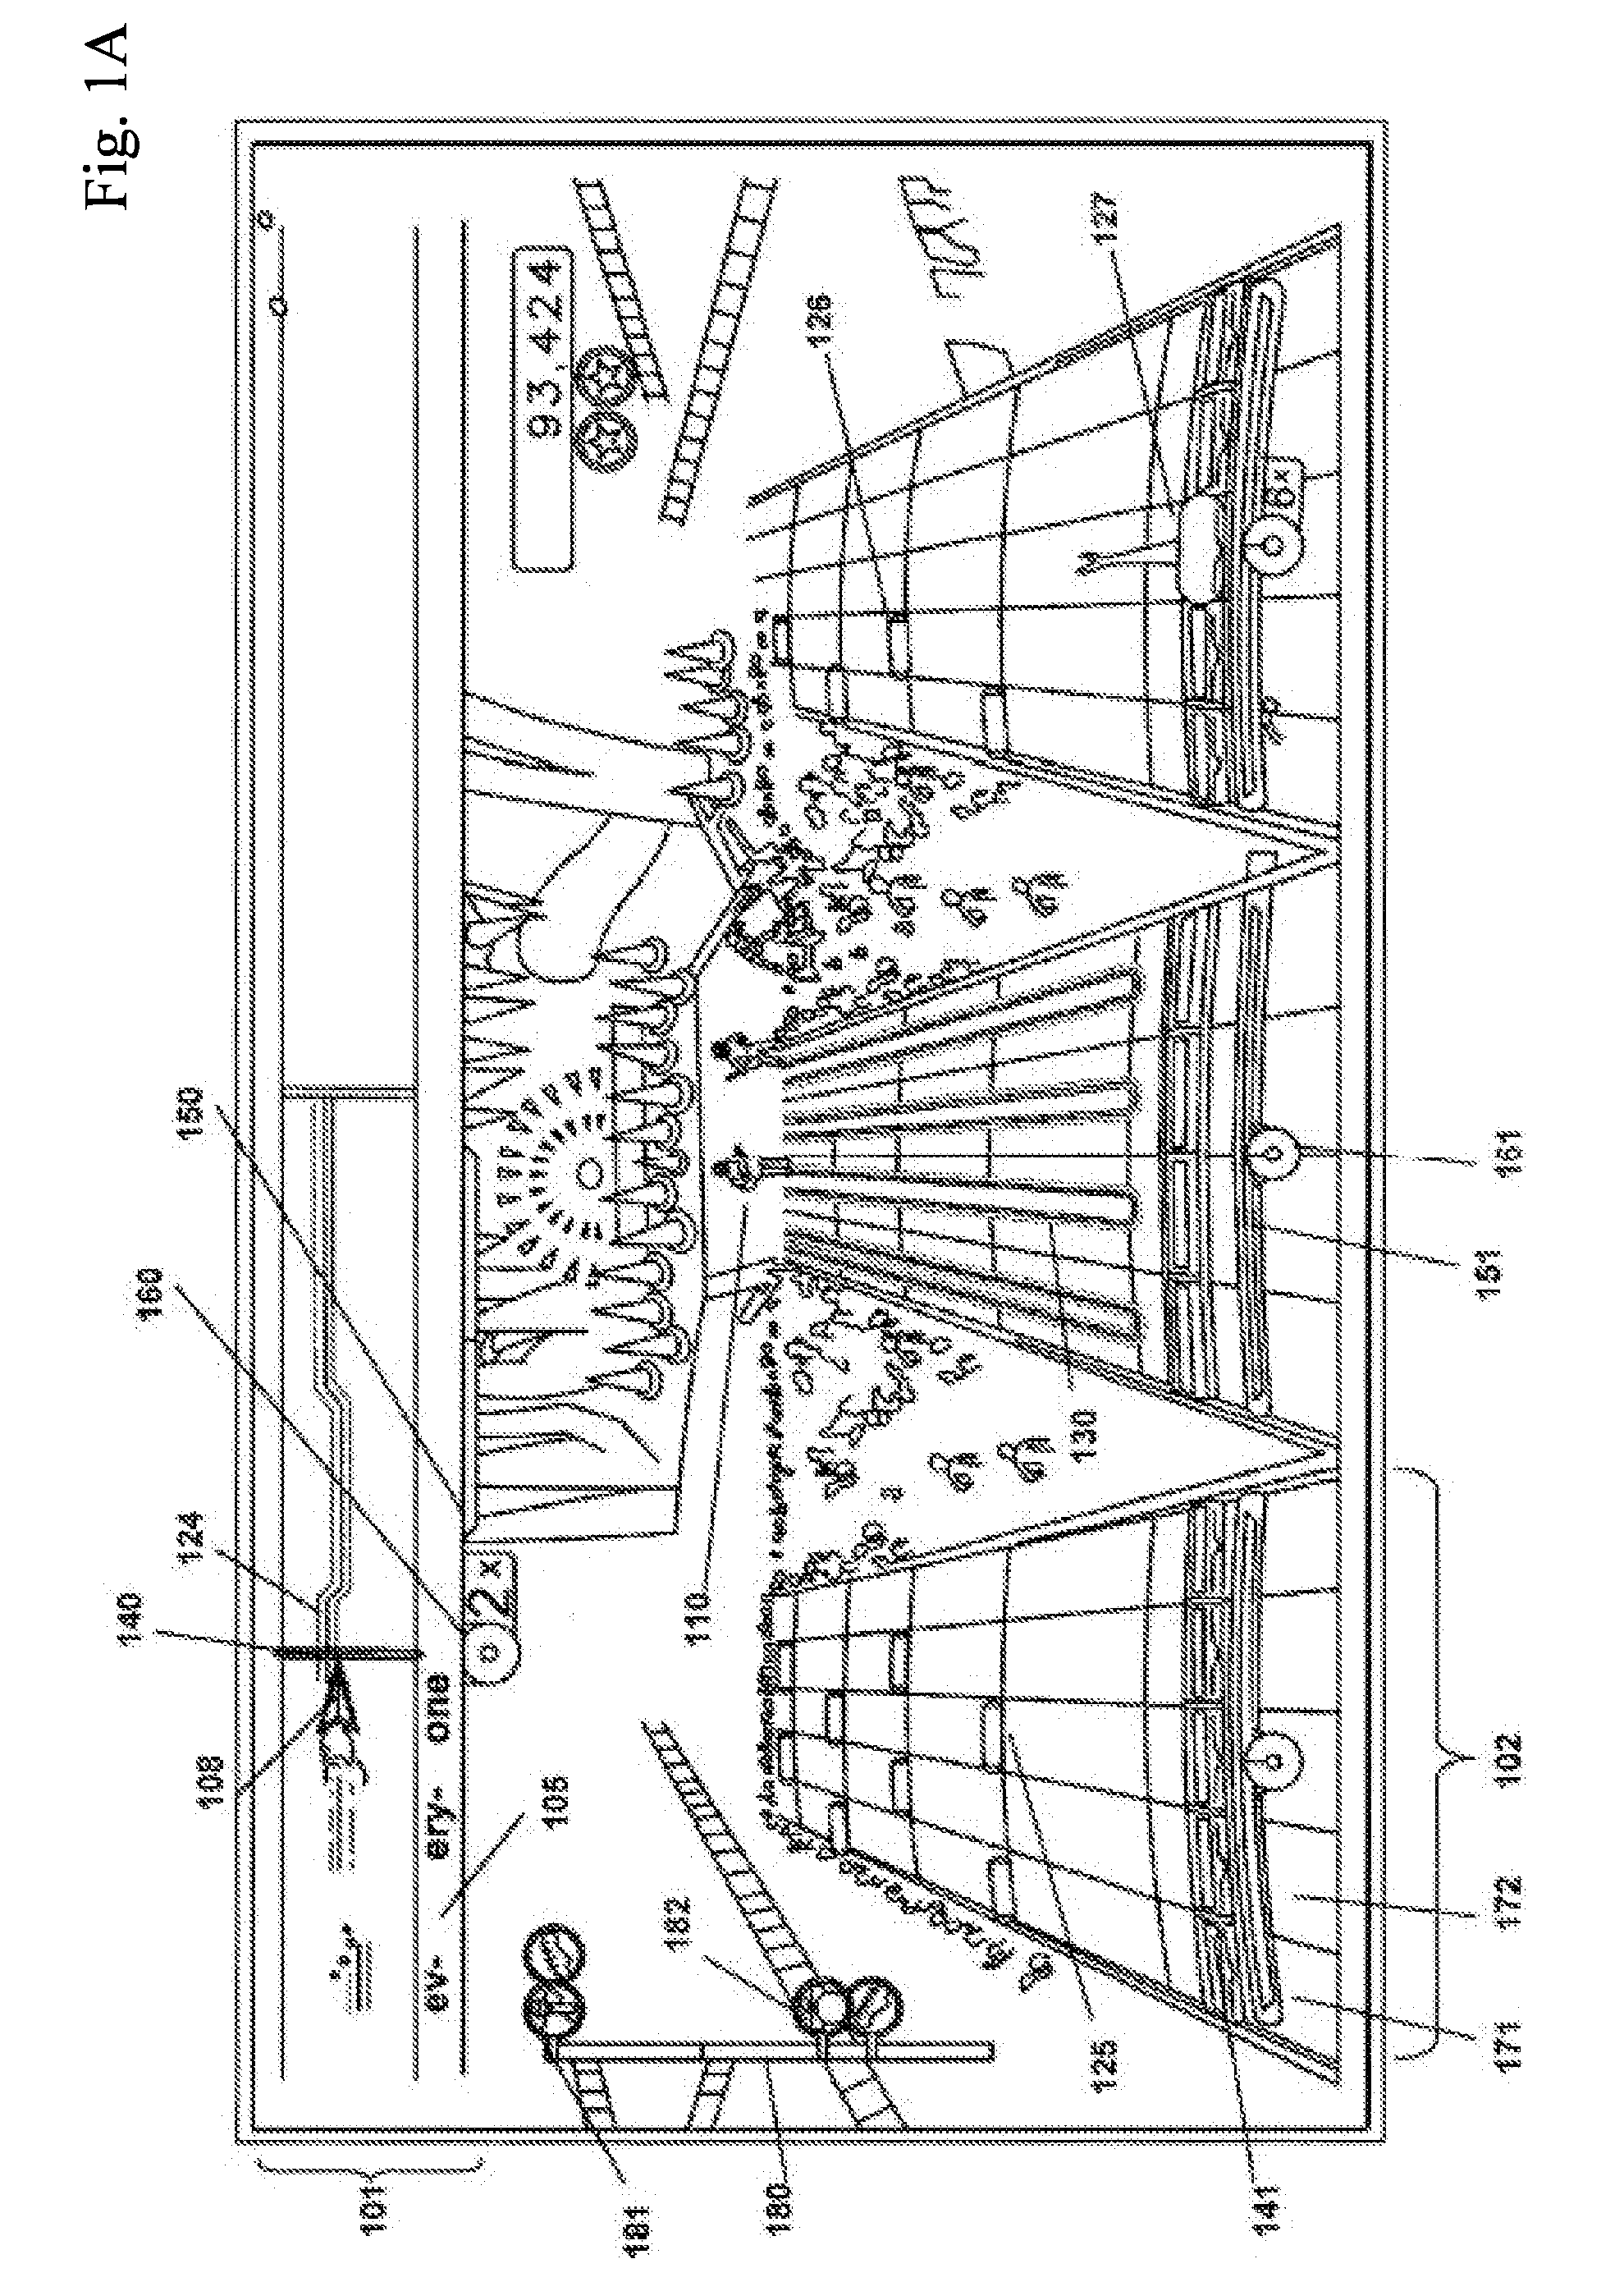 Systems and methods for asynchronous band interaction in a rhythm action game